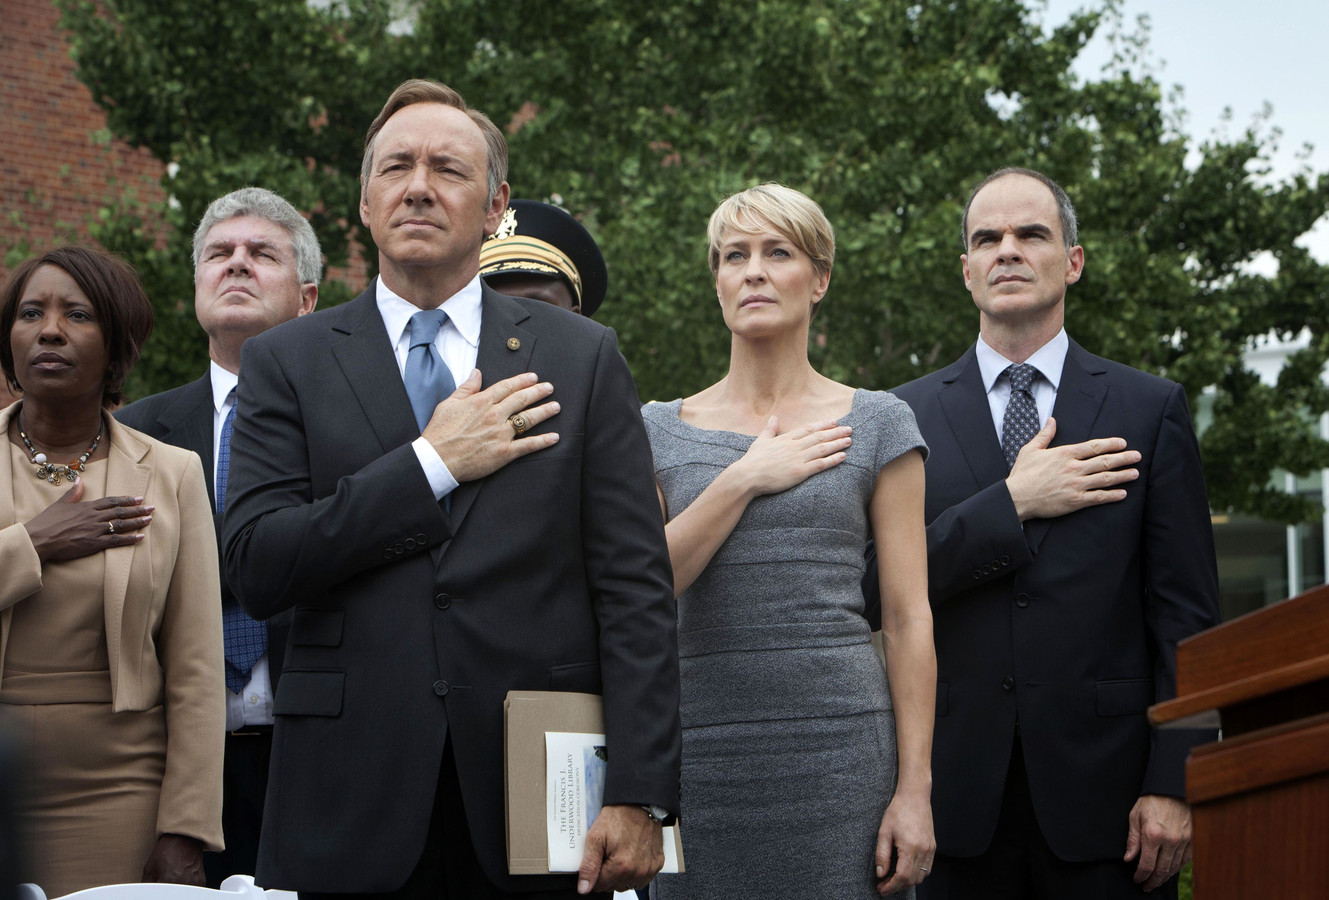 Kevin Spacey in 'House of Cards'.